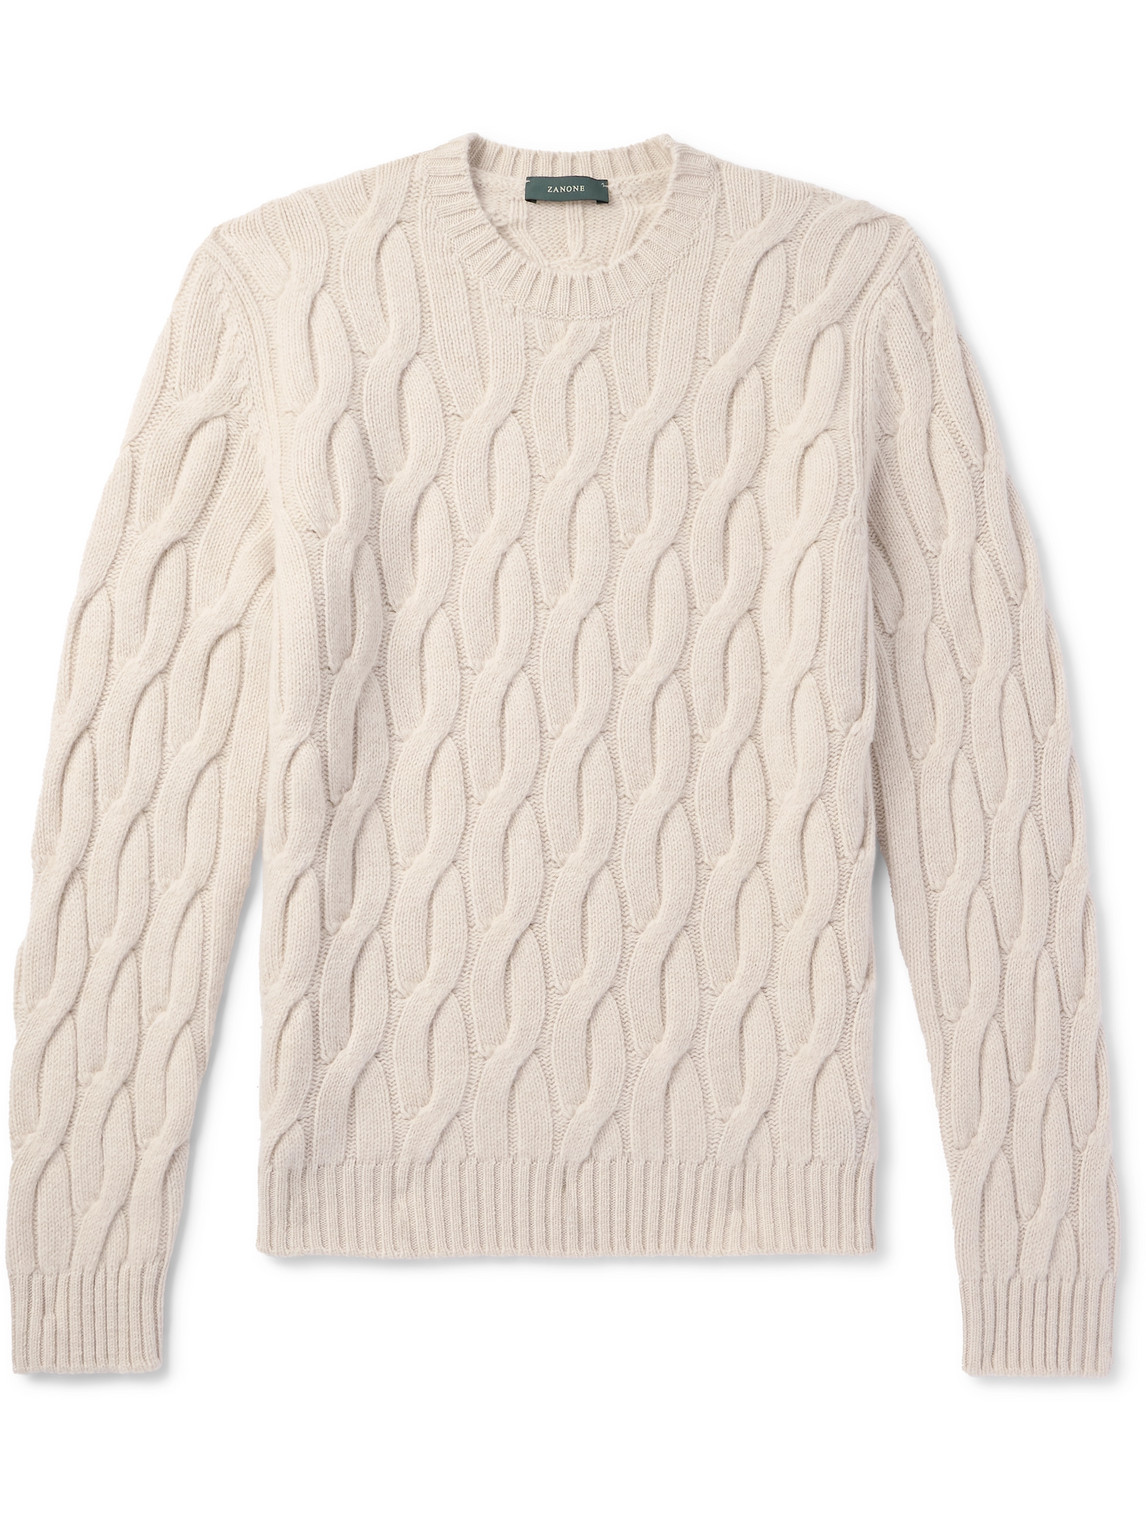 Incotex Zanone Cable-knit Wool Sweater In Neutrals